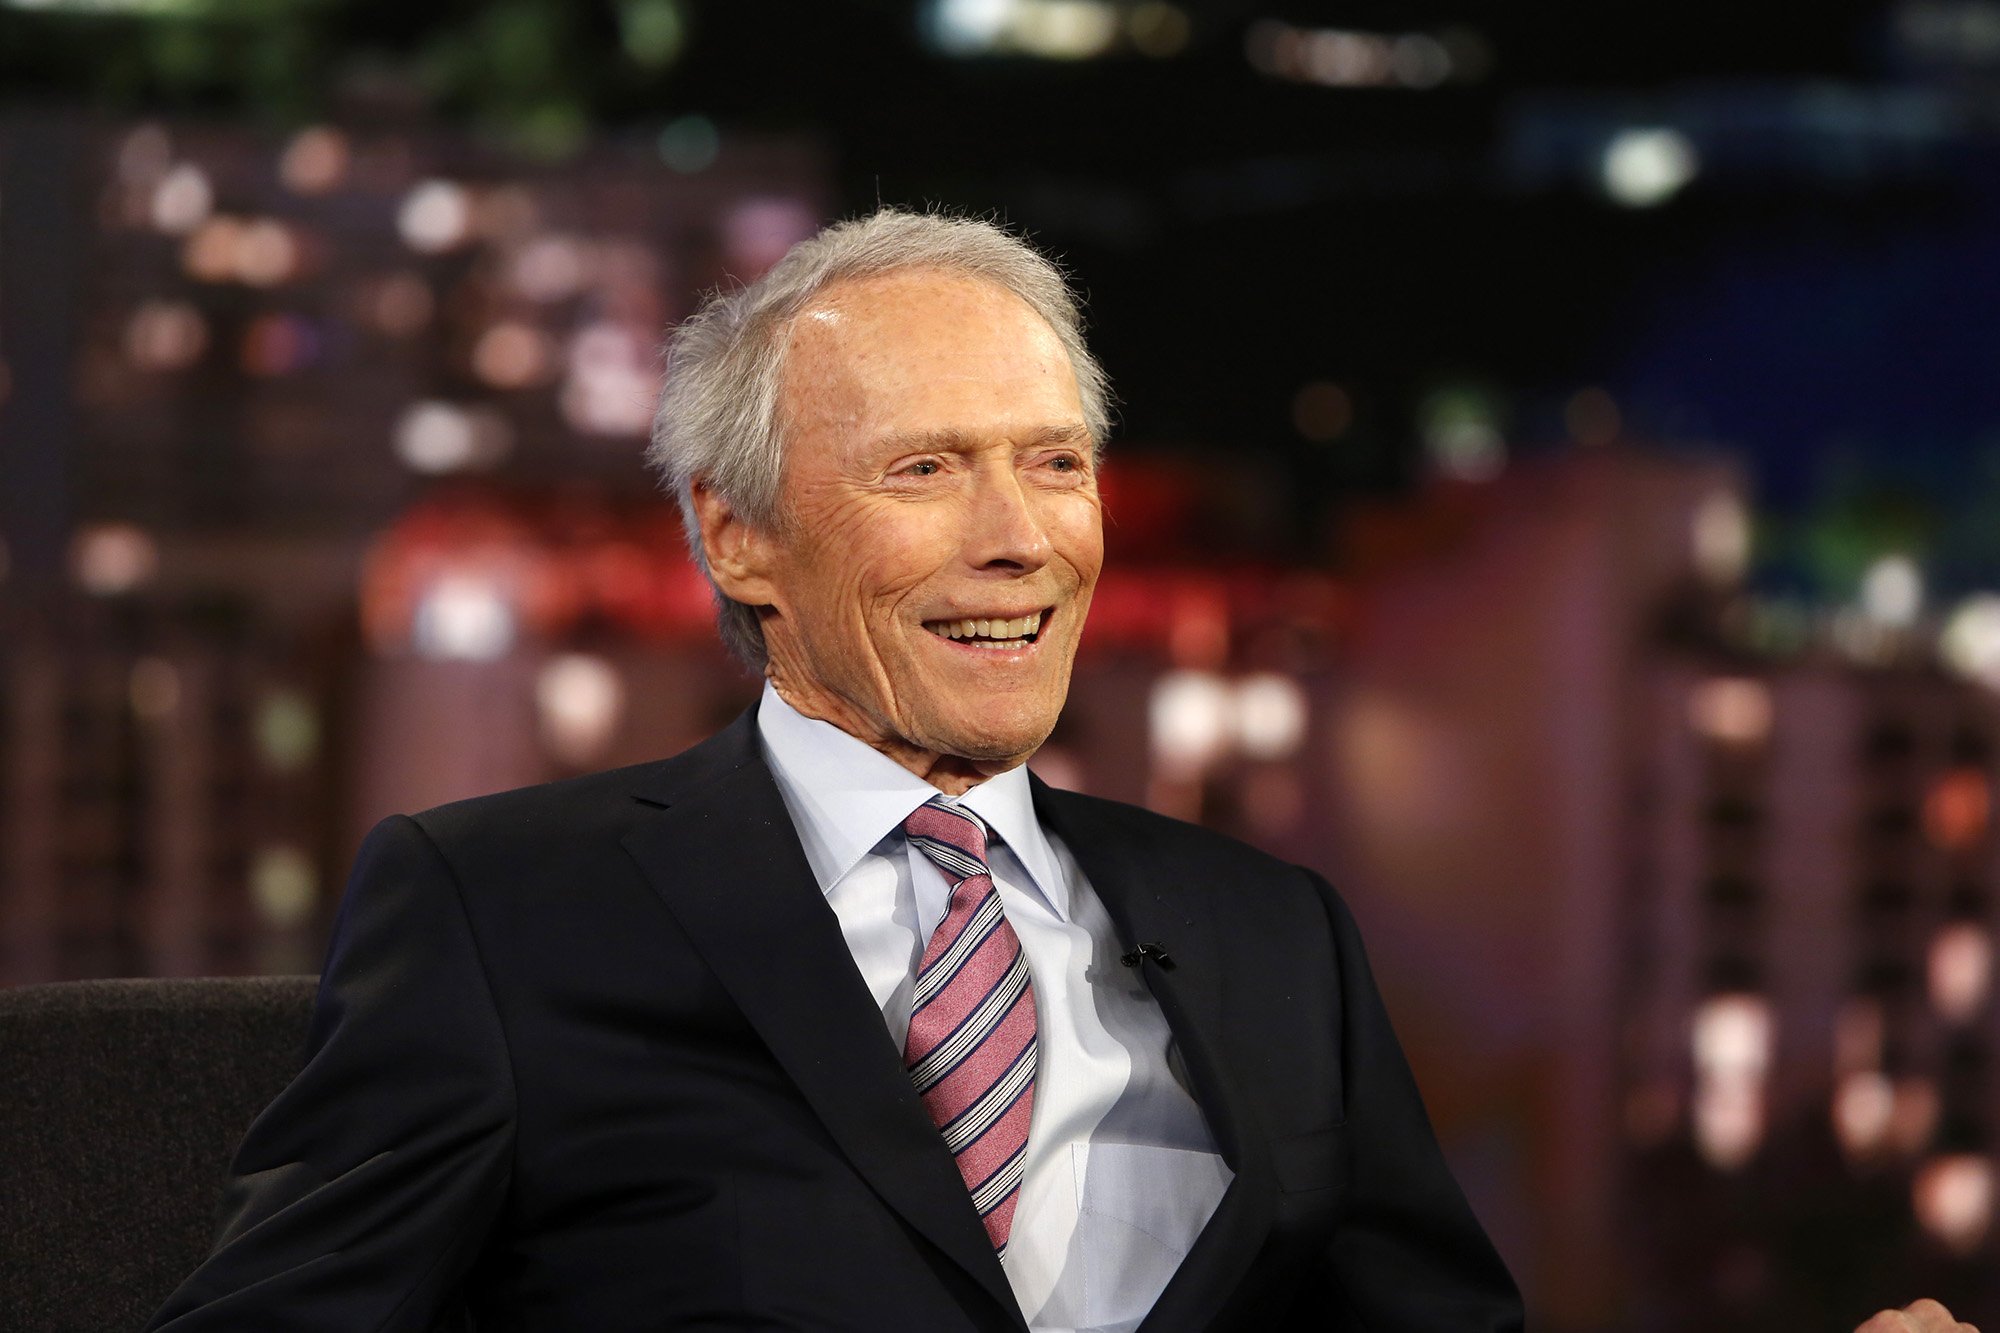 Clint Eastwood visits "Jimmy Kimmel Live" on February 6, 2018. | Source: Getty Images